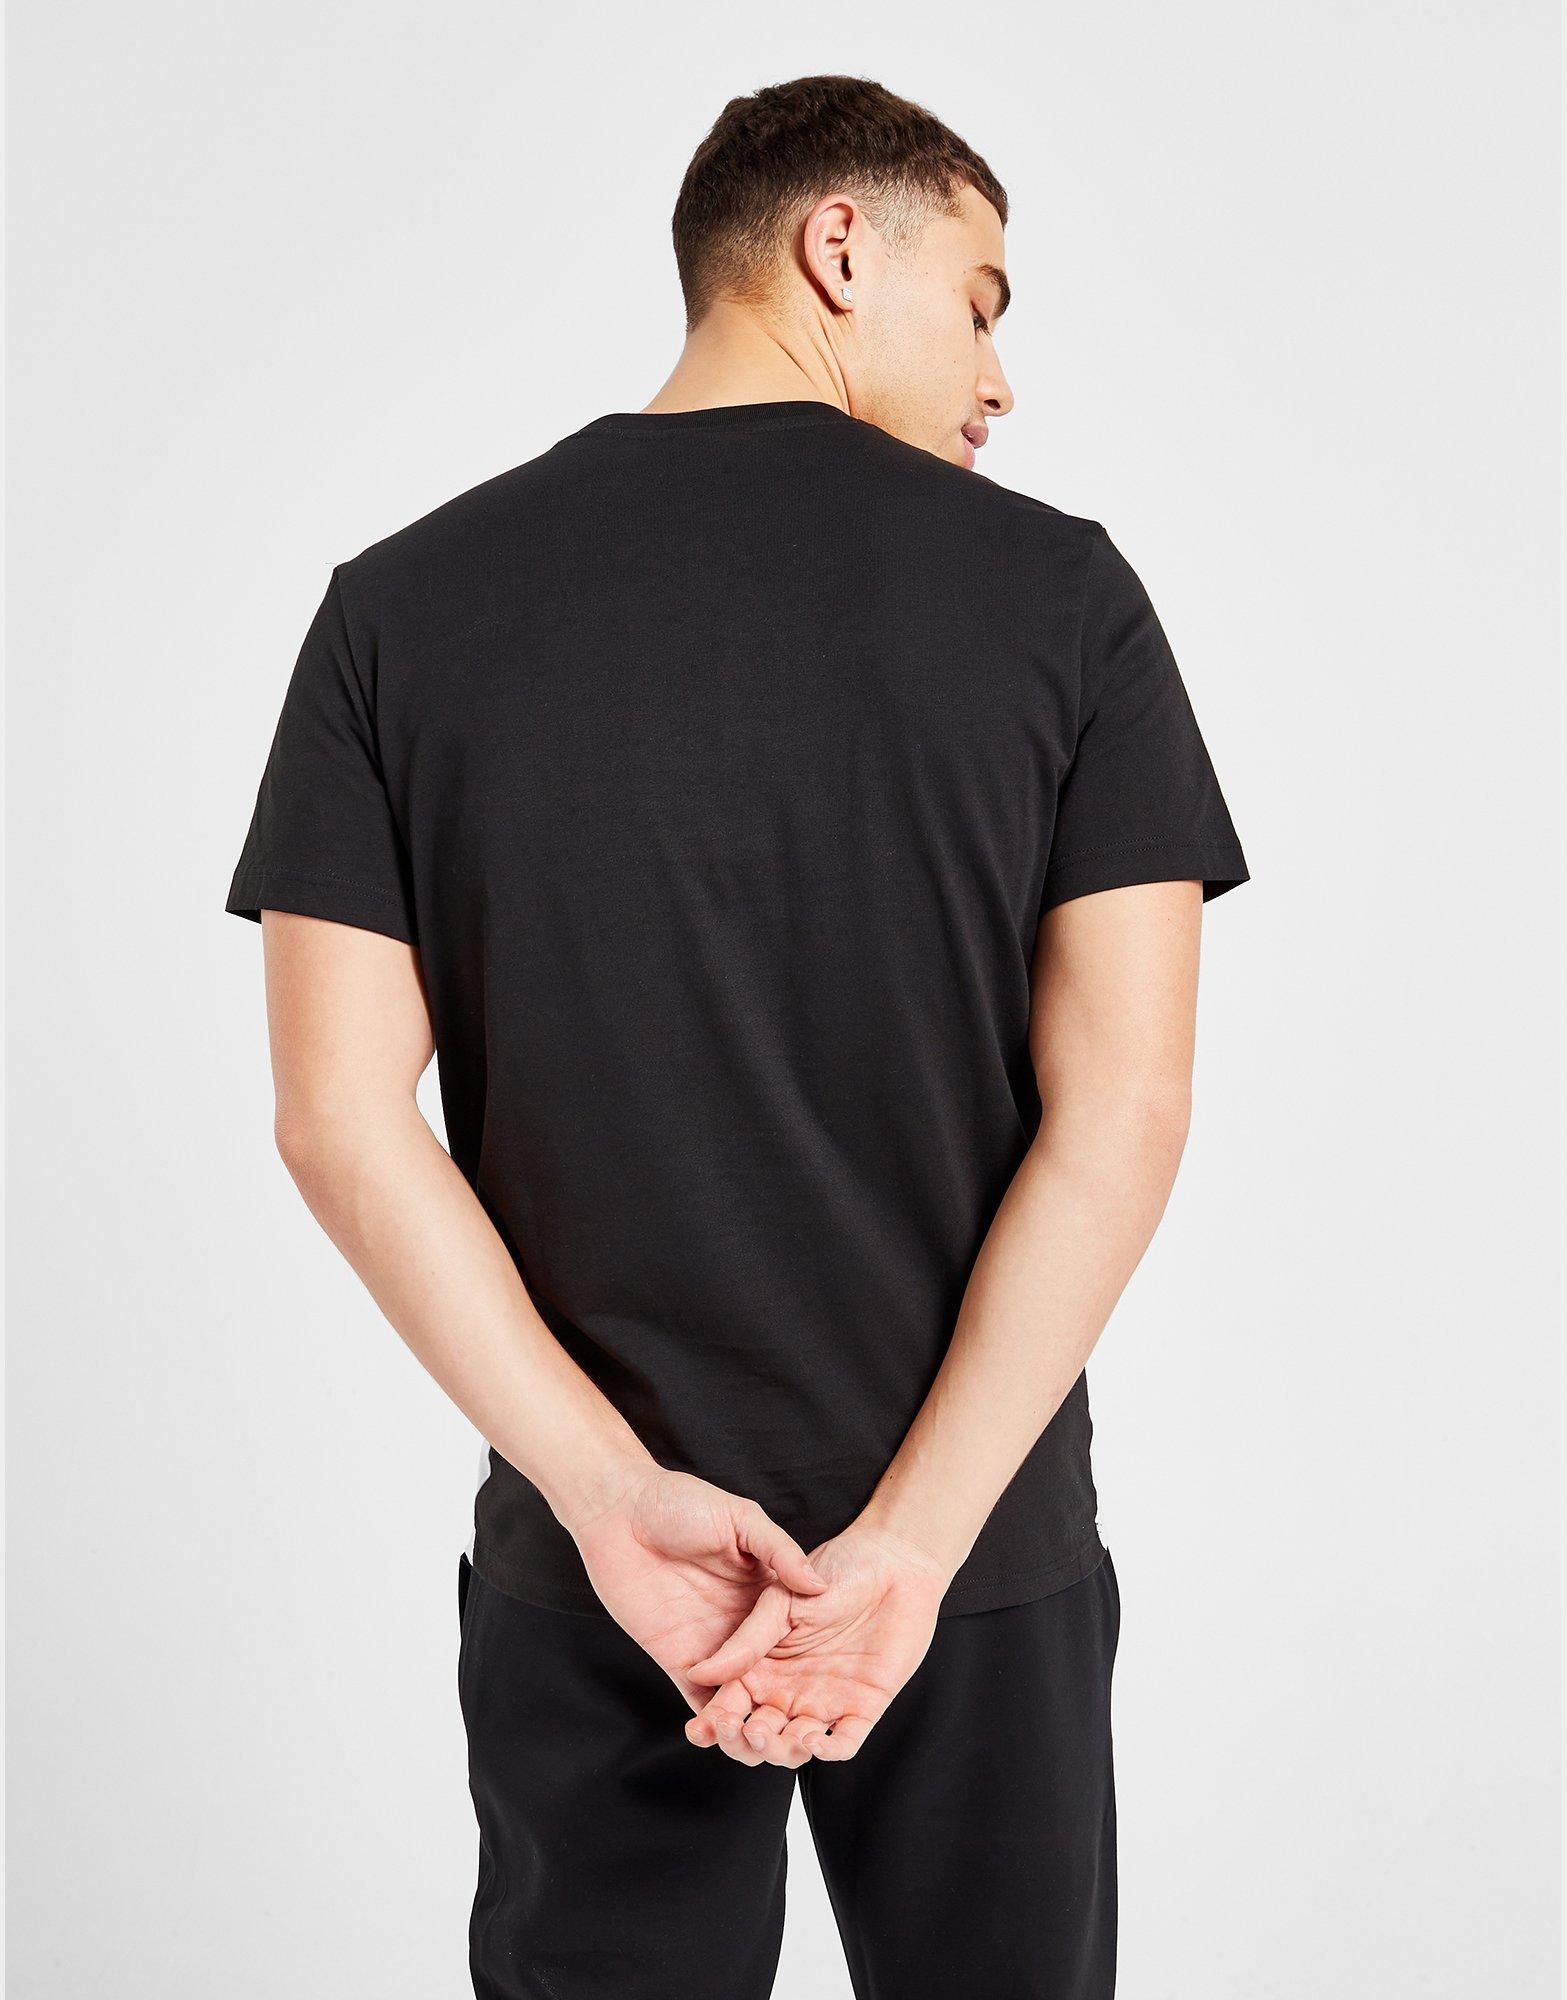 Lacoste heavyweight color block logo t-shirt in black